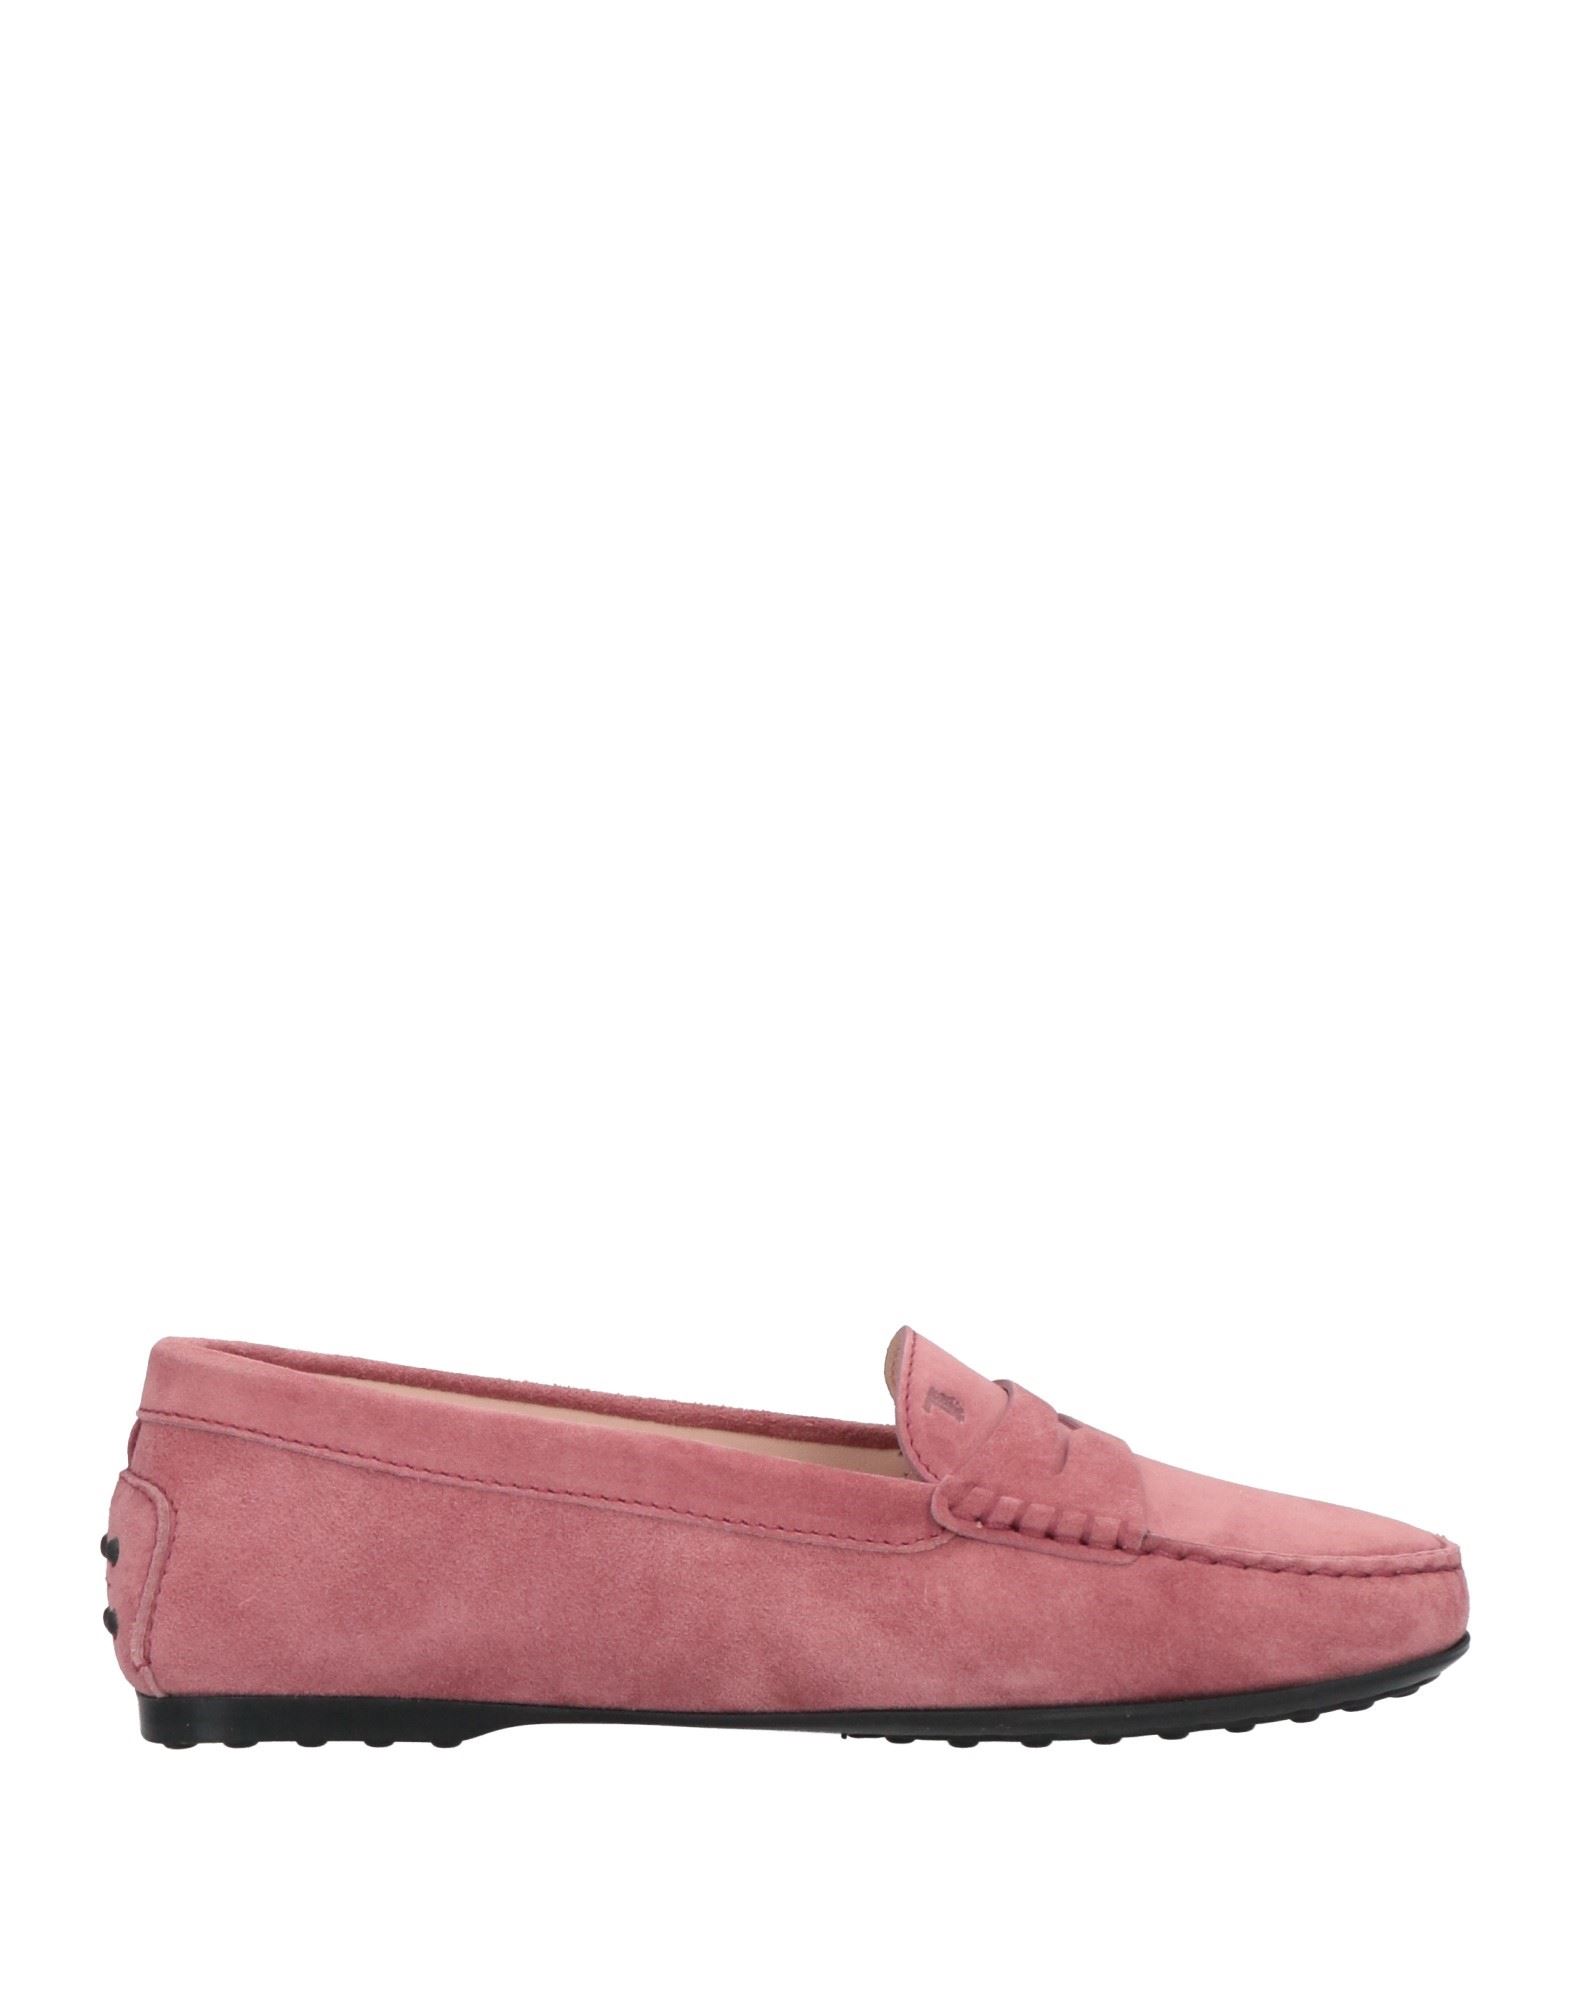 Tod's Woman Loafers Pastel Pink Size 5 Soft Leather